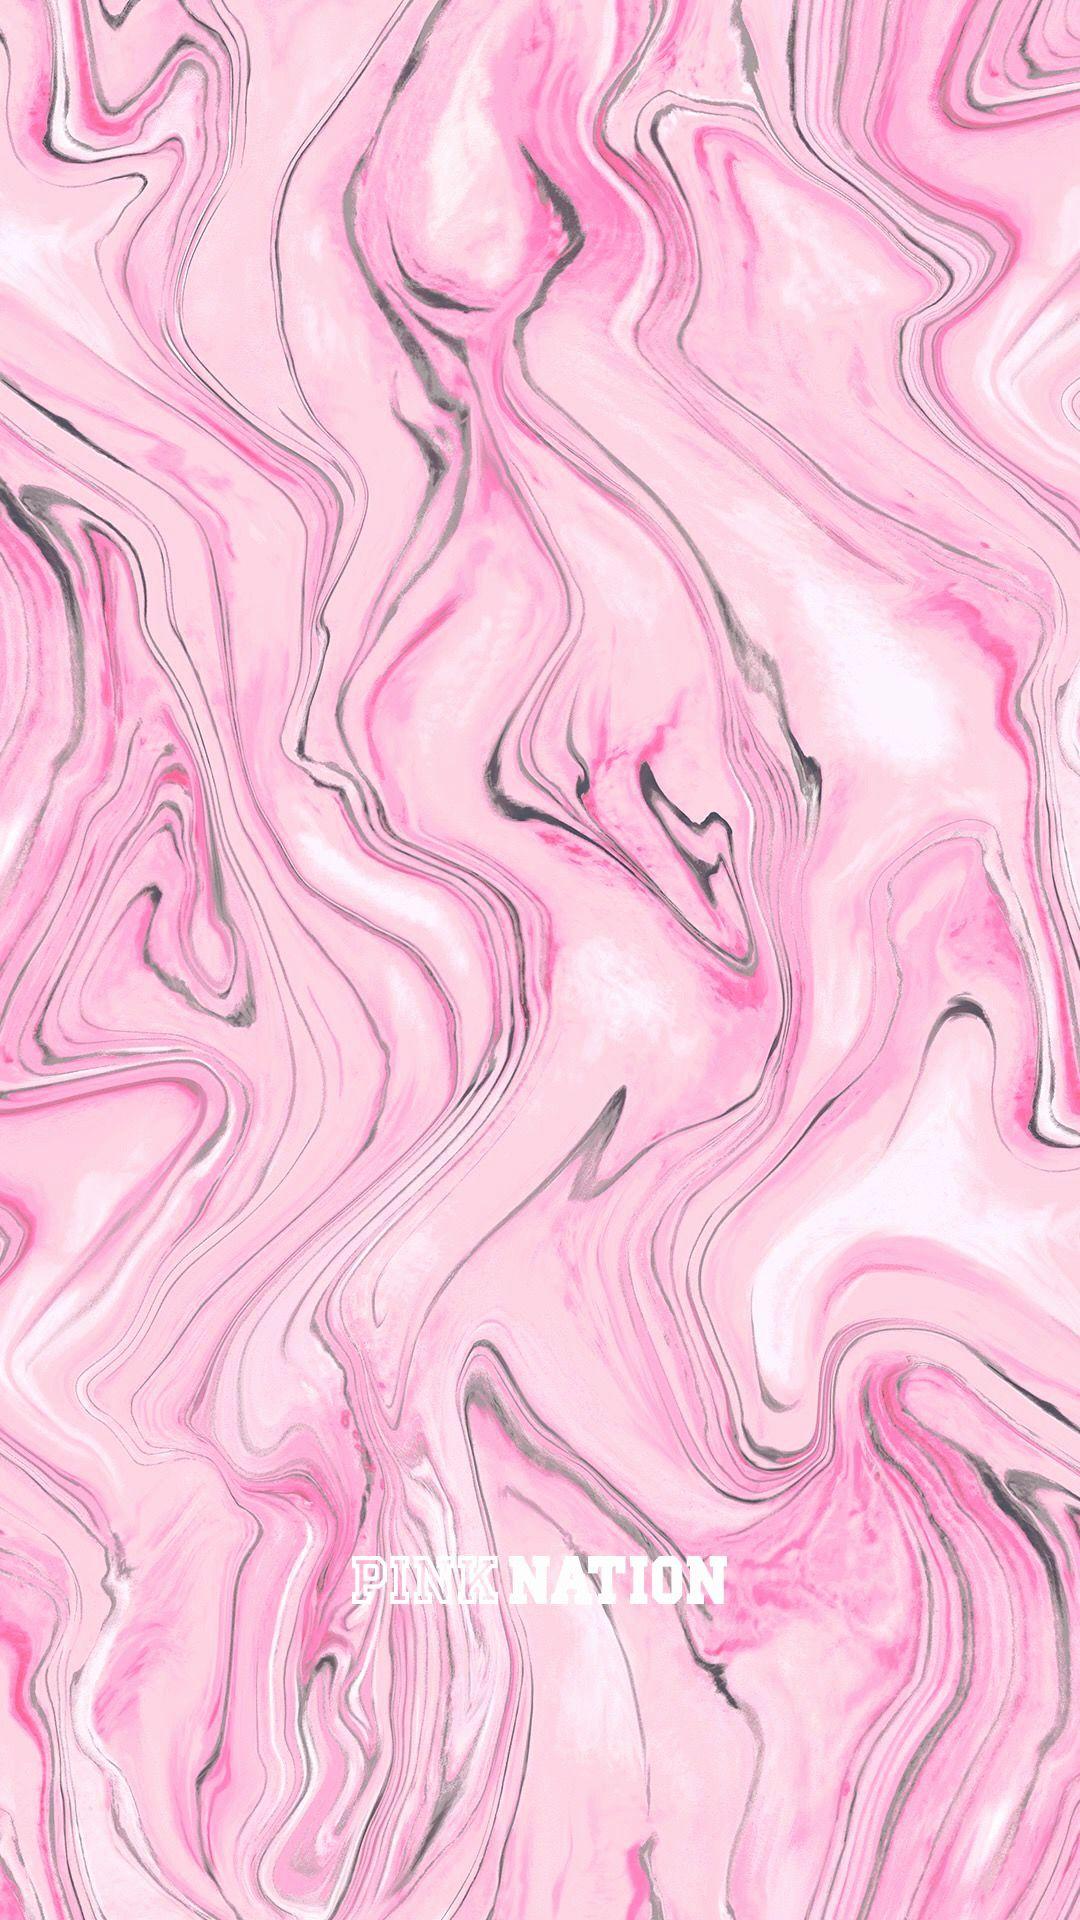 Pink Marble Wallpaper Best Of 13 Best Marble Wallpaper Image On